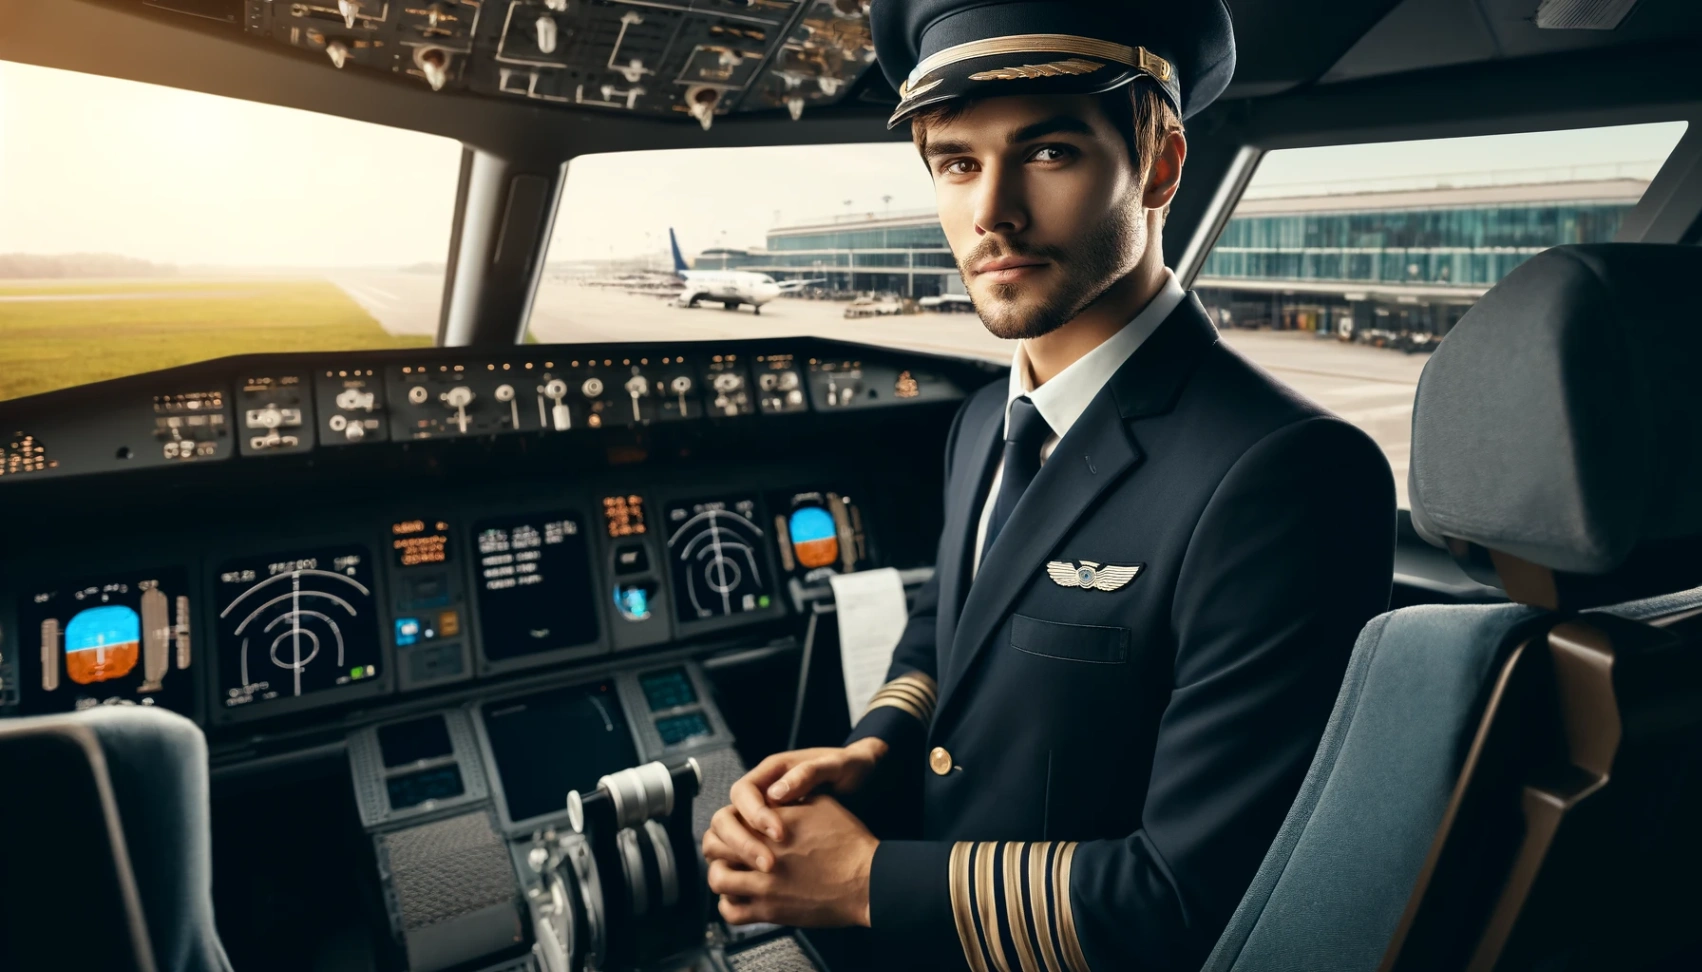 Launch Your Career With International Airlines Group 